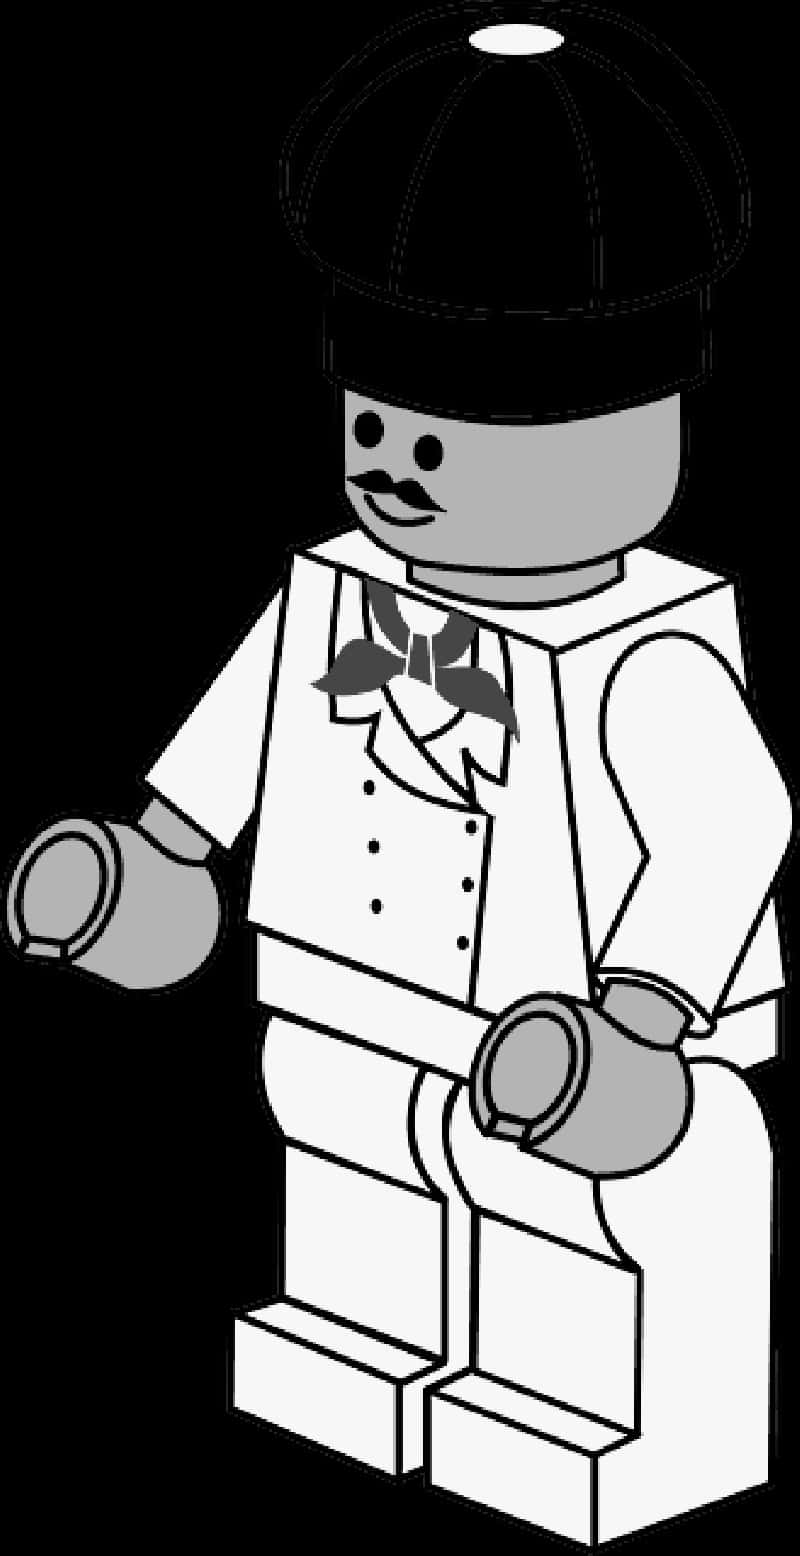 Lego Character With Chef Hat